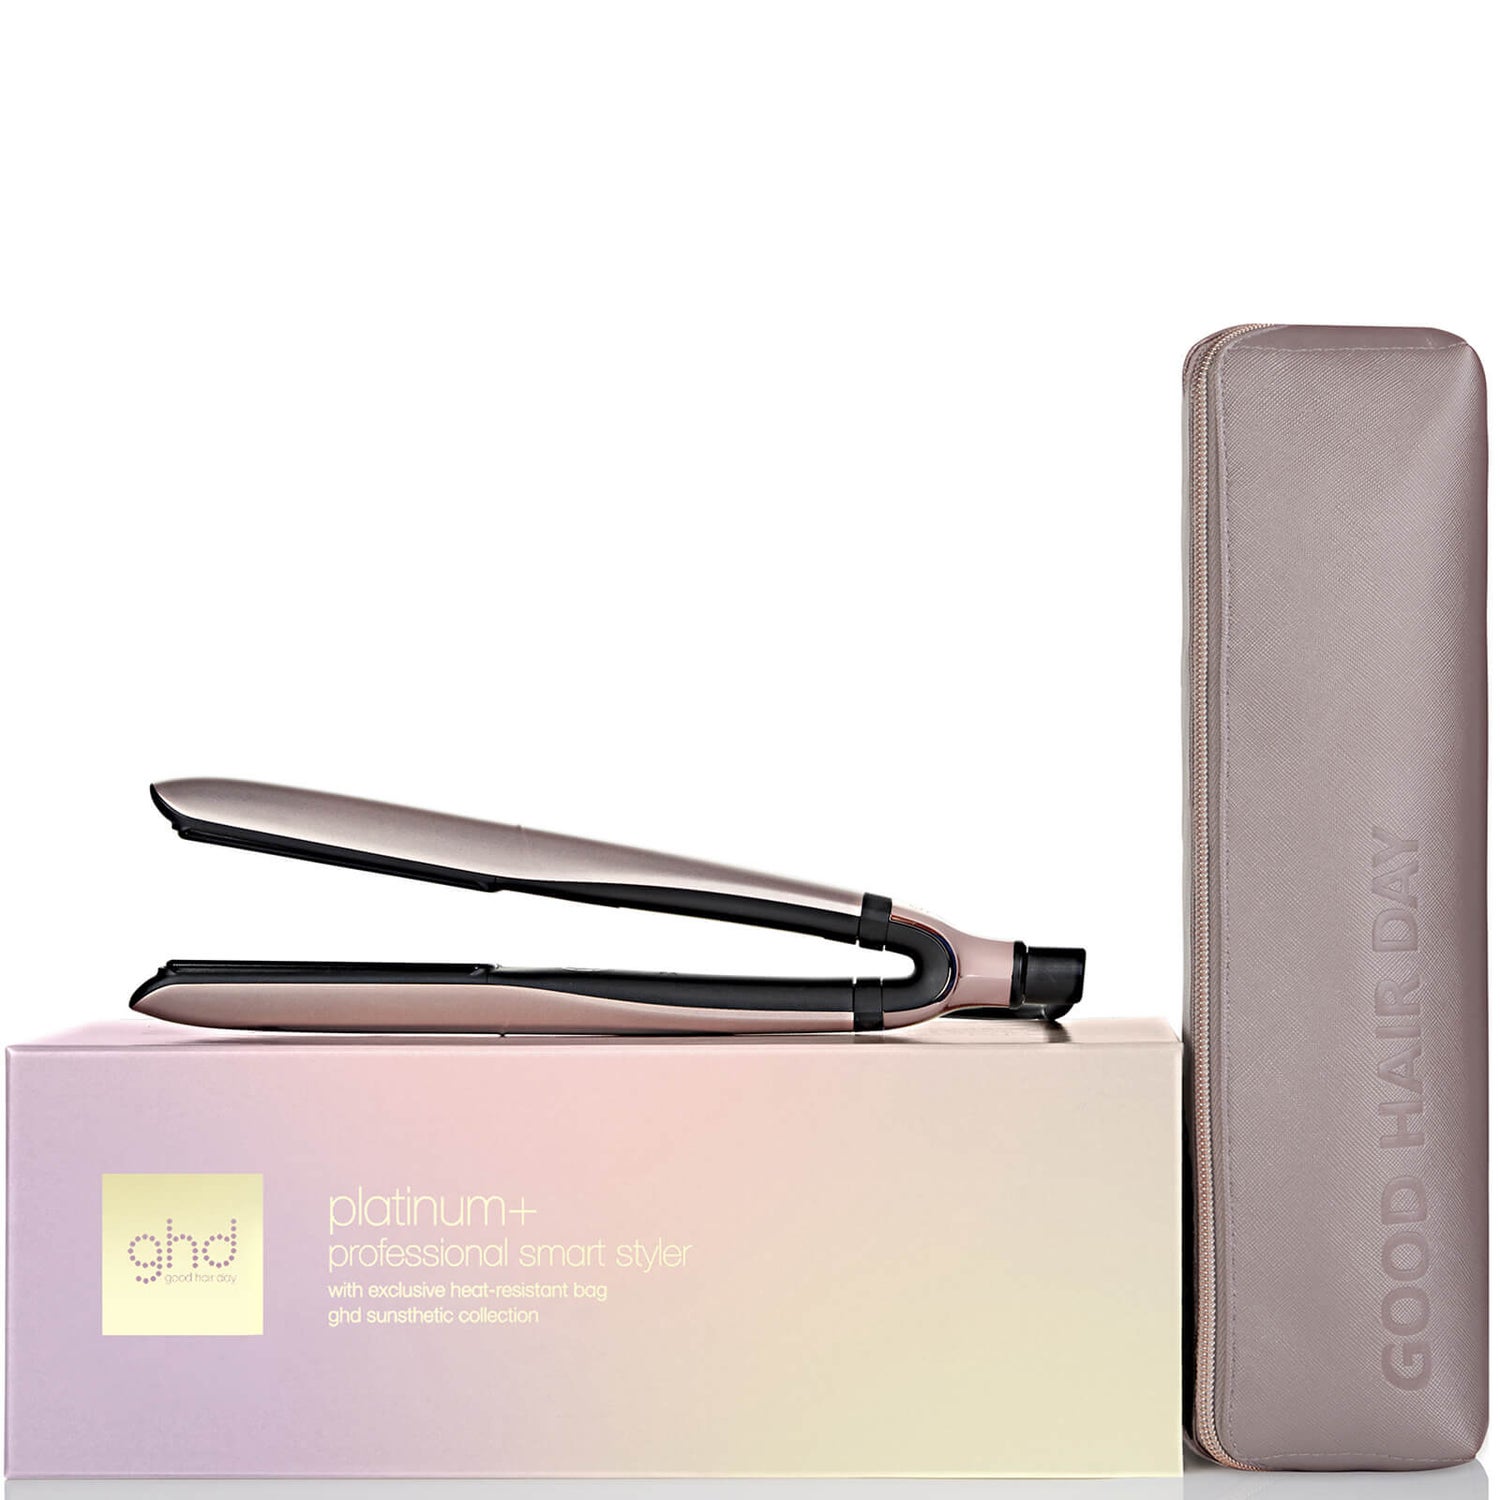 ghd Sunsthetic Collection Platinum+ Hair Straightener - Taupe